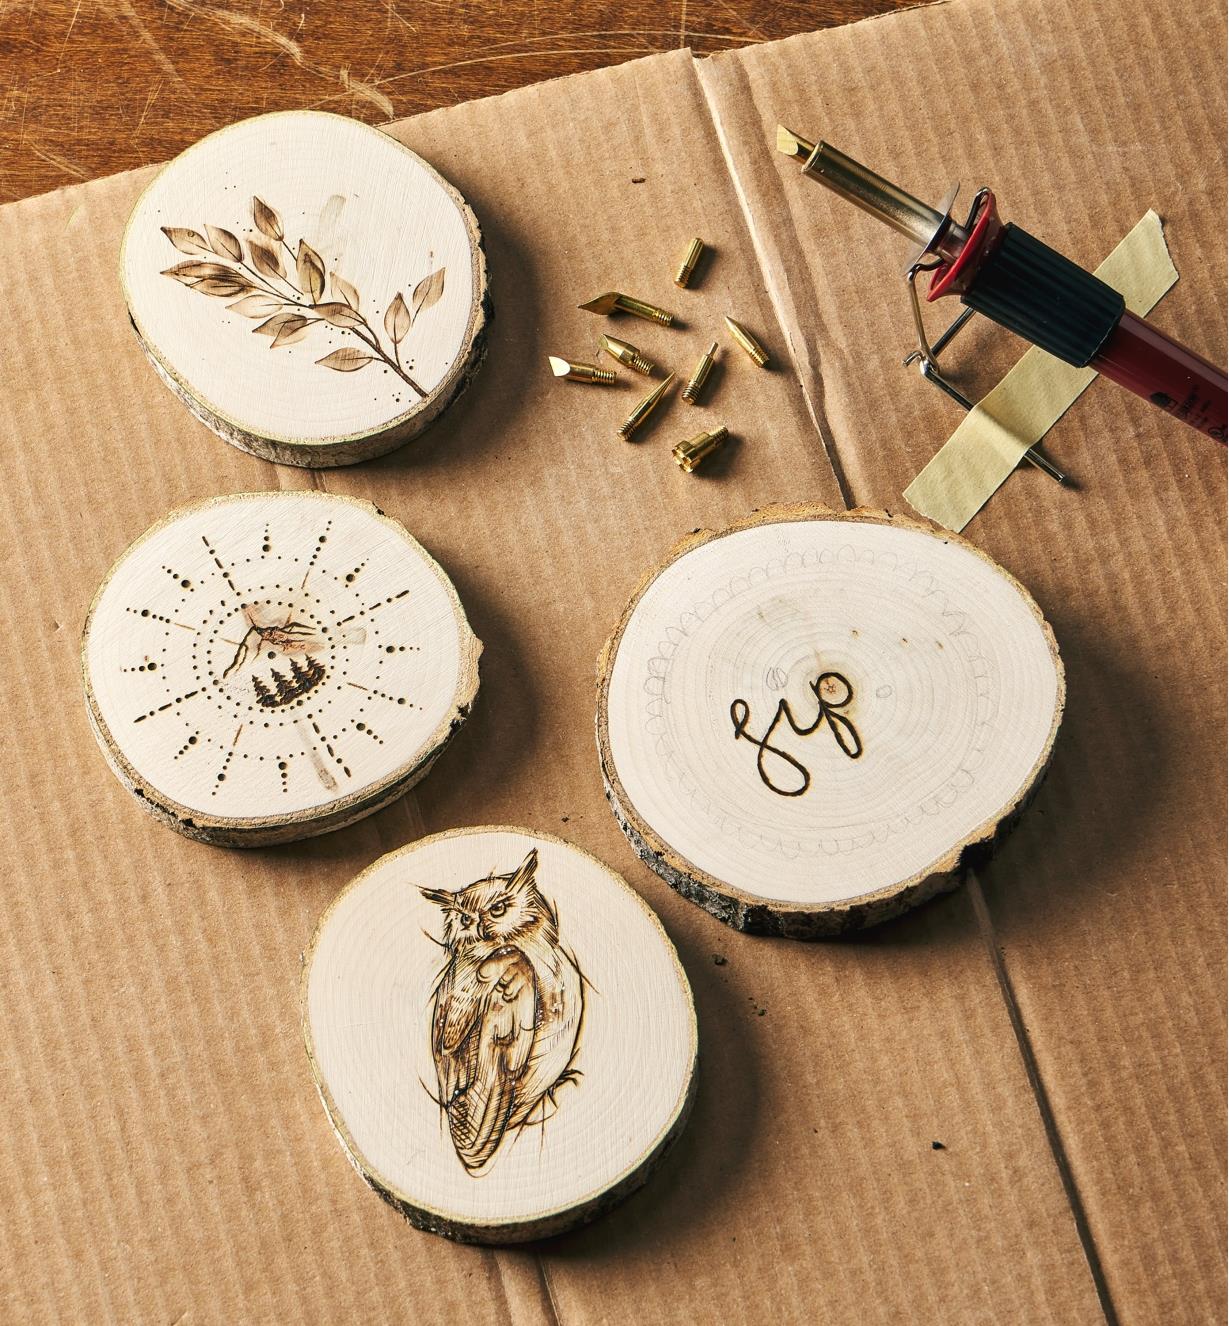 Four aspen rounds adorned with wood-burned designs next to the heat pen and interchangeable nibs